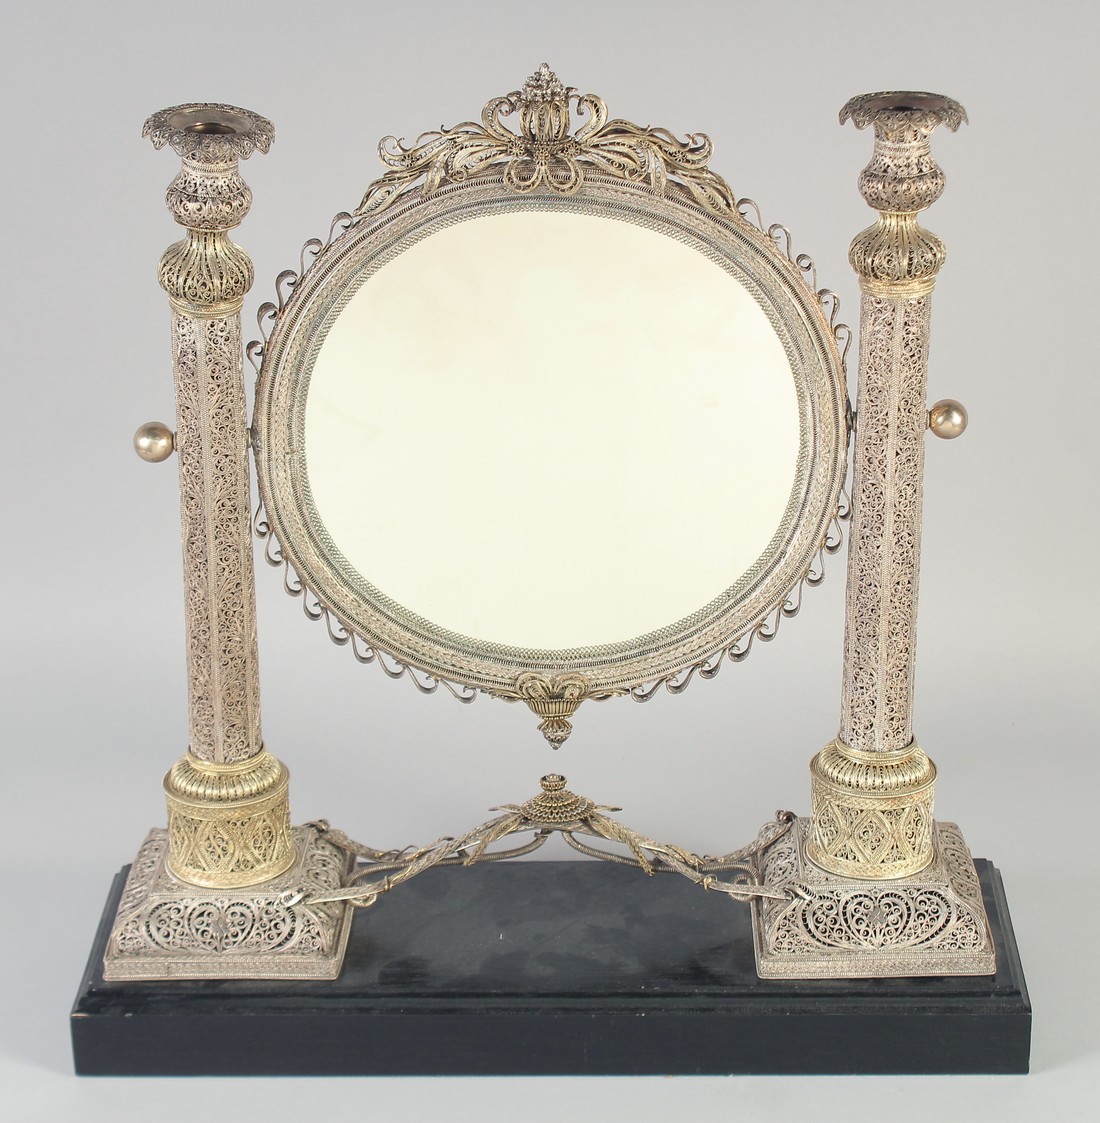 A VERY FINE AND LARGE 19TH CENTURY OTTOMAN TURKISH PARCEL GILT FILIGREE SILVER MIRROR, on a later